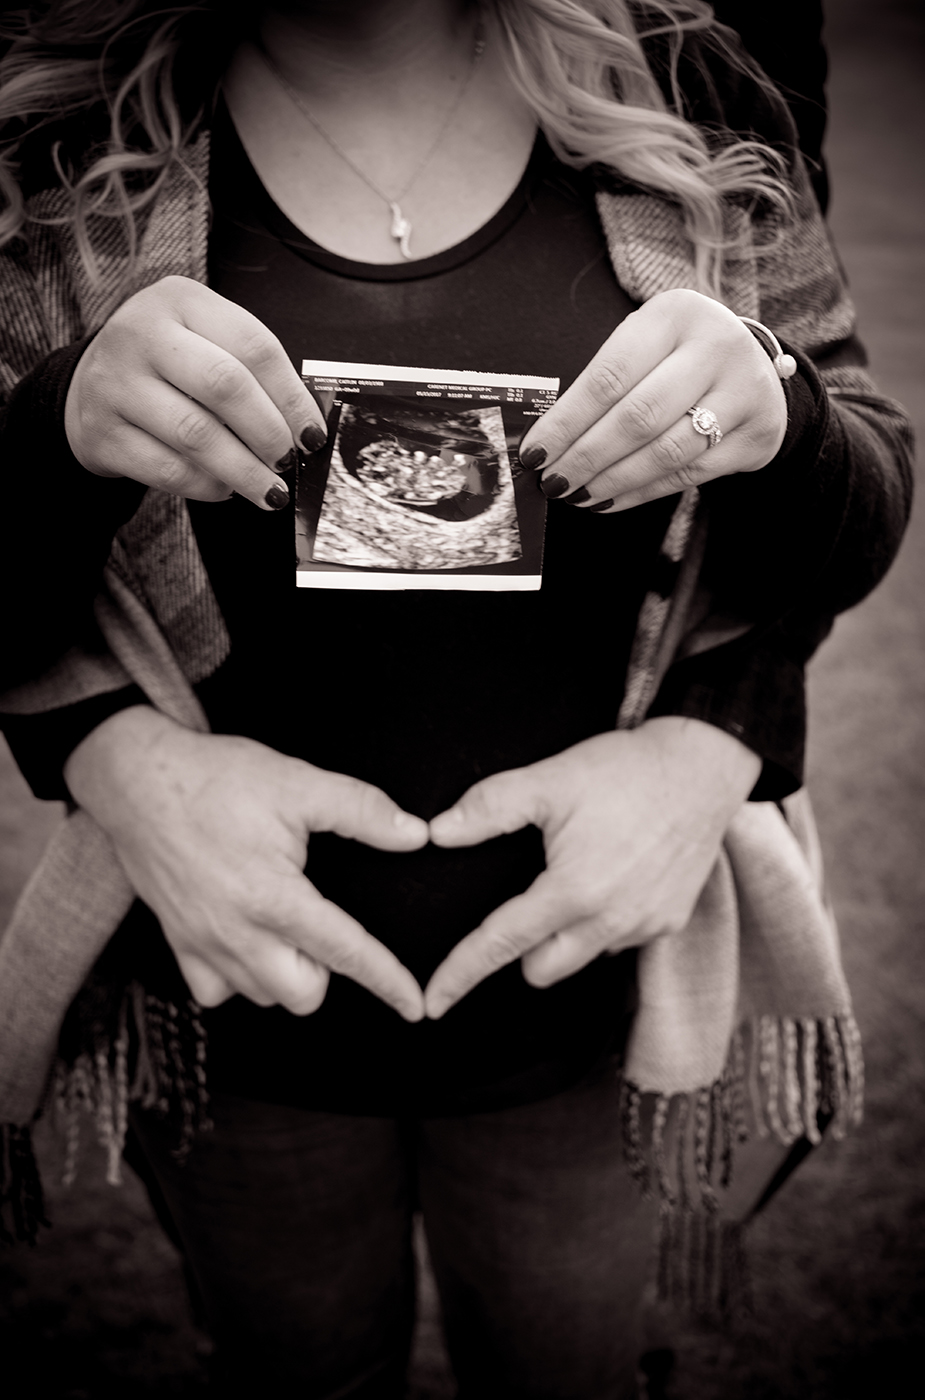 All Occasions Photography Albany NY - Maternity Photography Ultrasound Picture